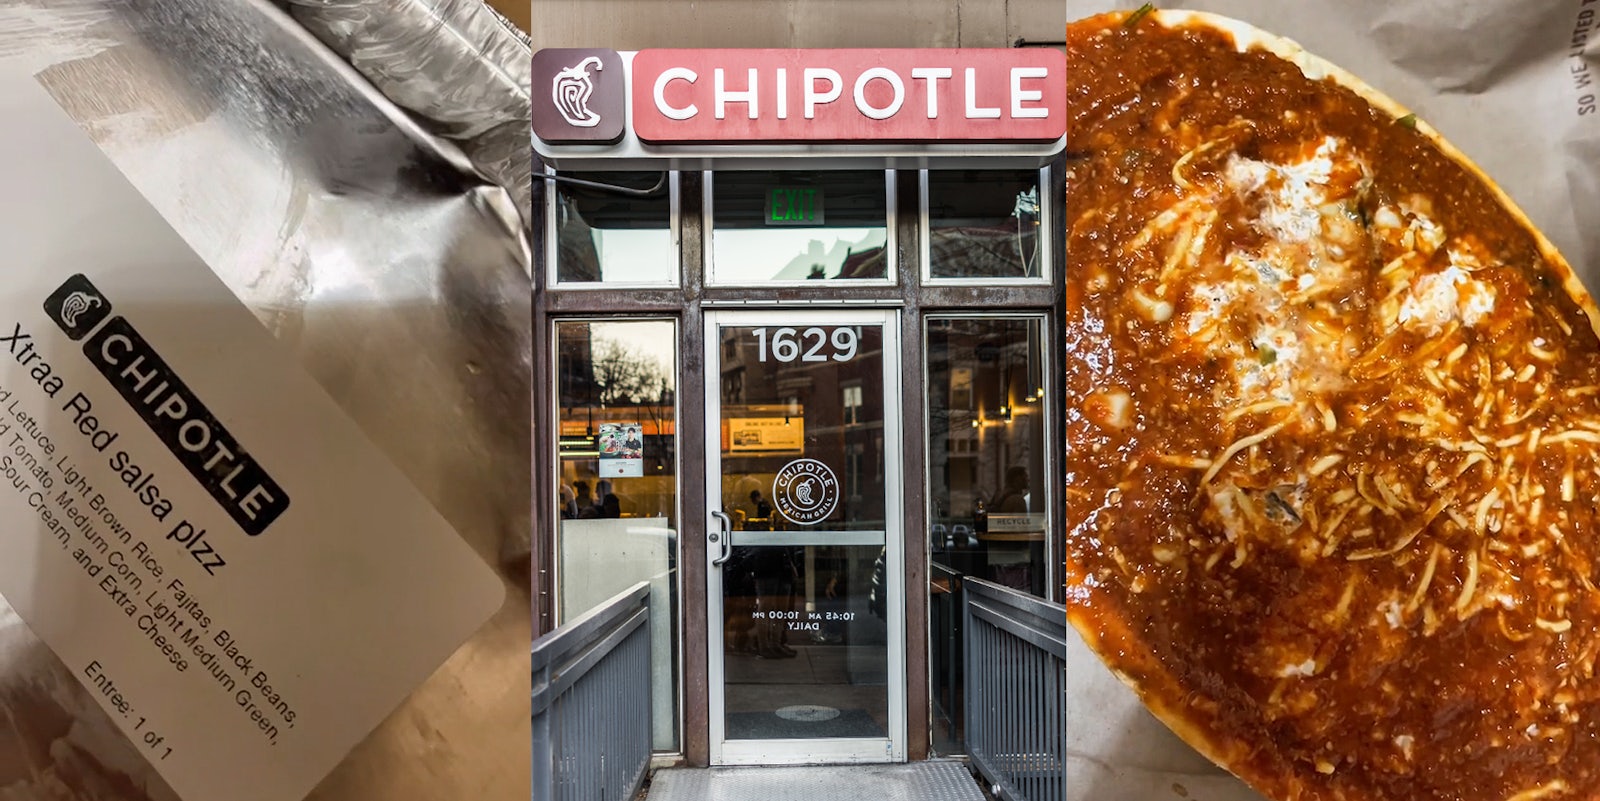 Chipotle food in container with sticker reading 'Xtra Red salsa plzz' (l) Chipotle sign over doorway (c) Chipotle bowl drenched with red salsa (r)